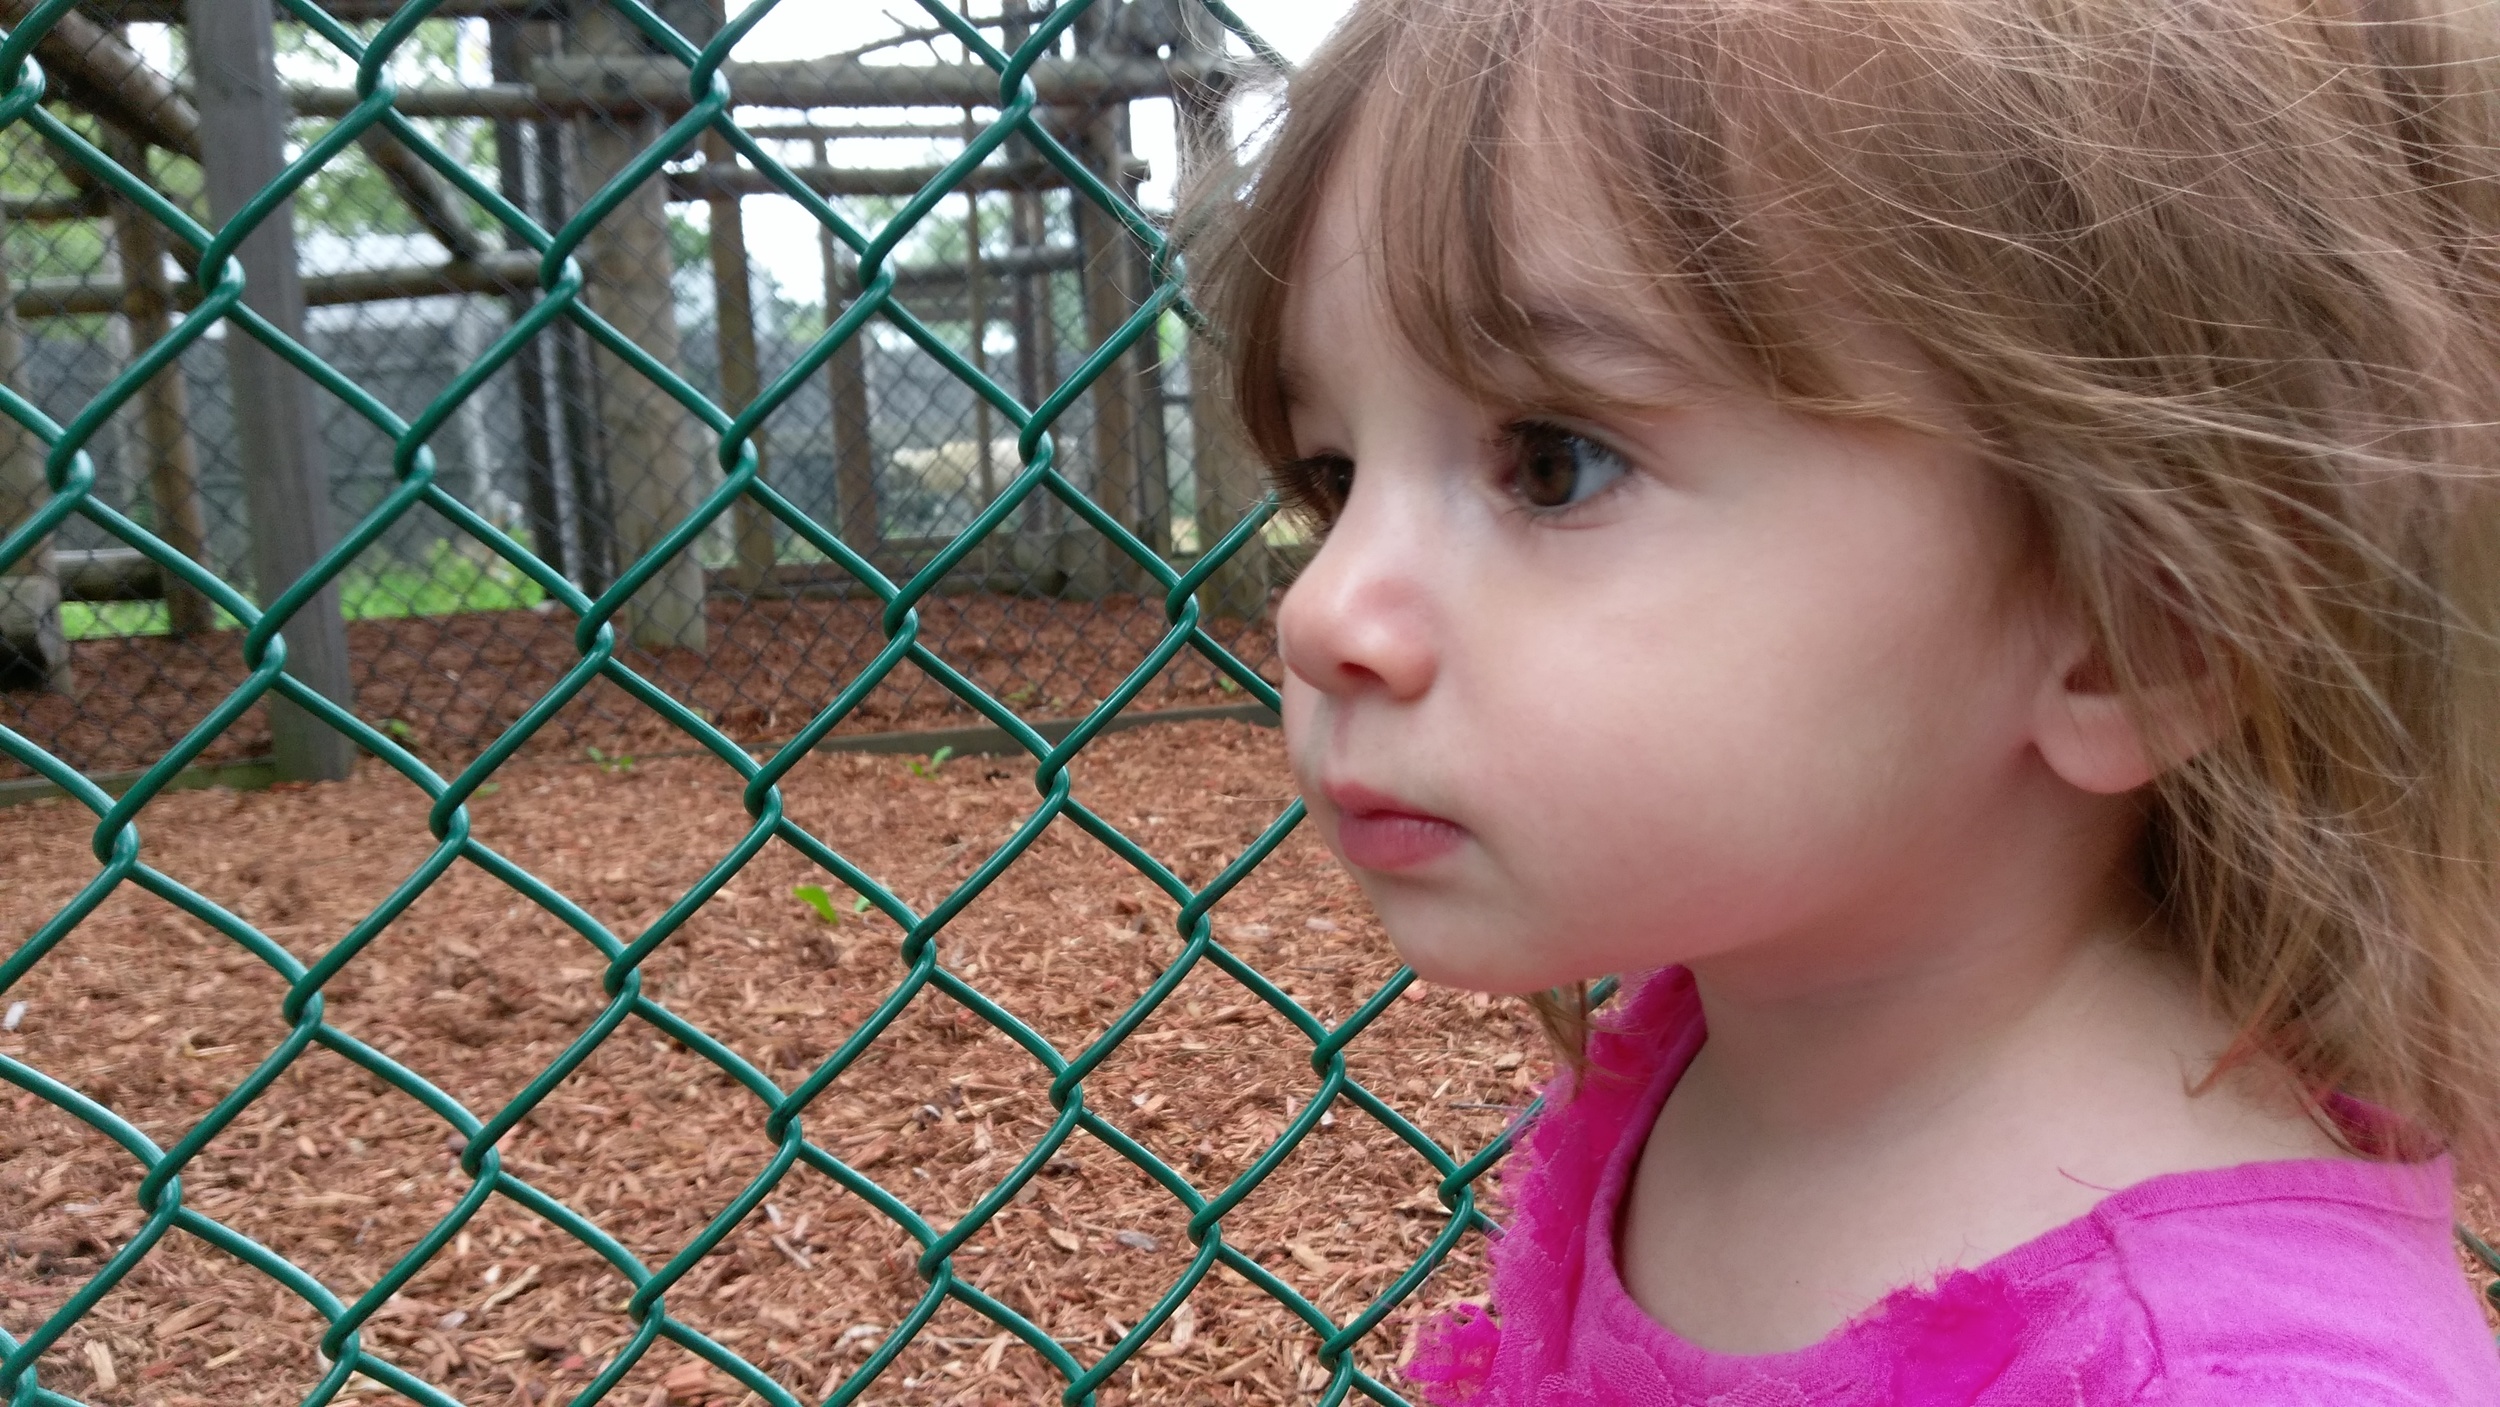 Cece at the zoo